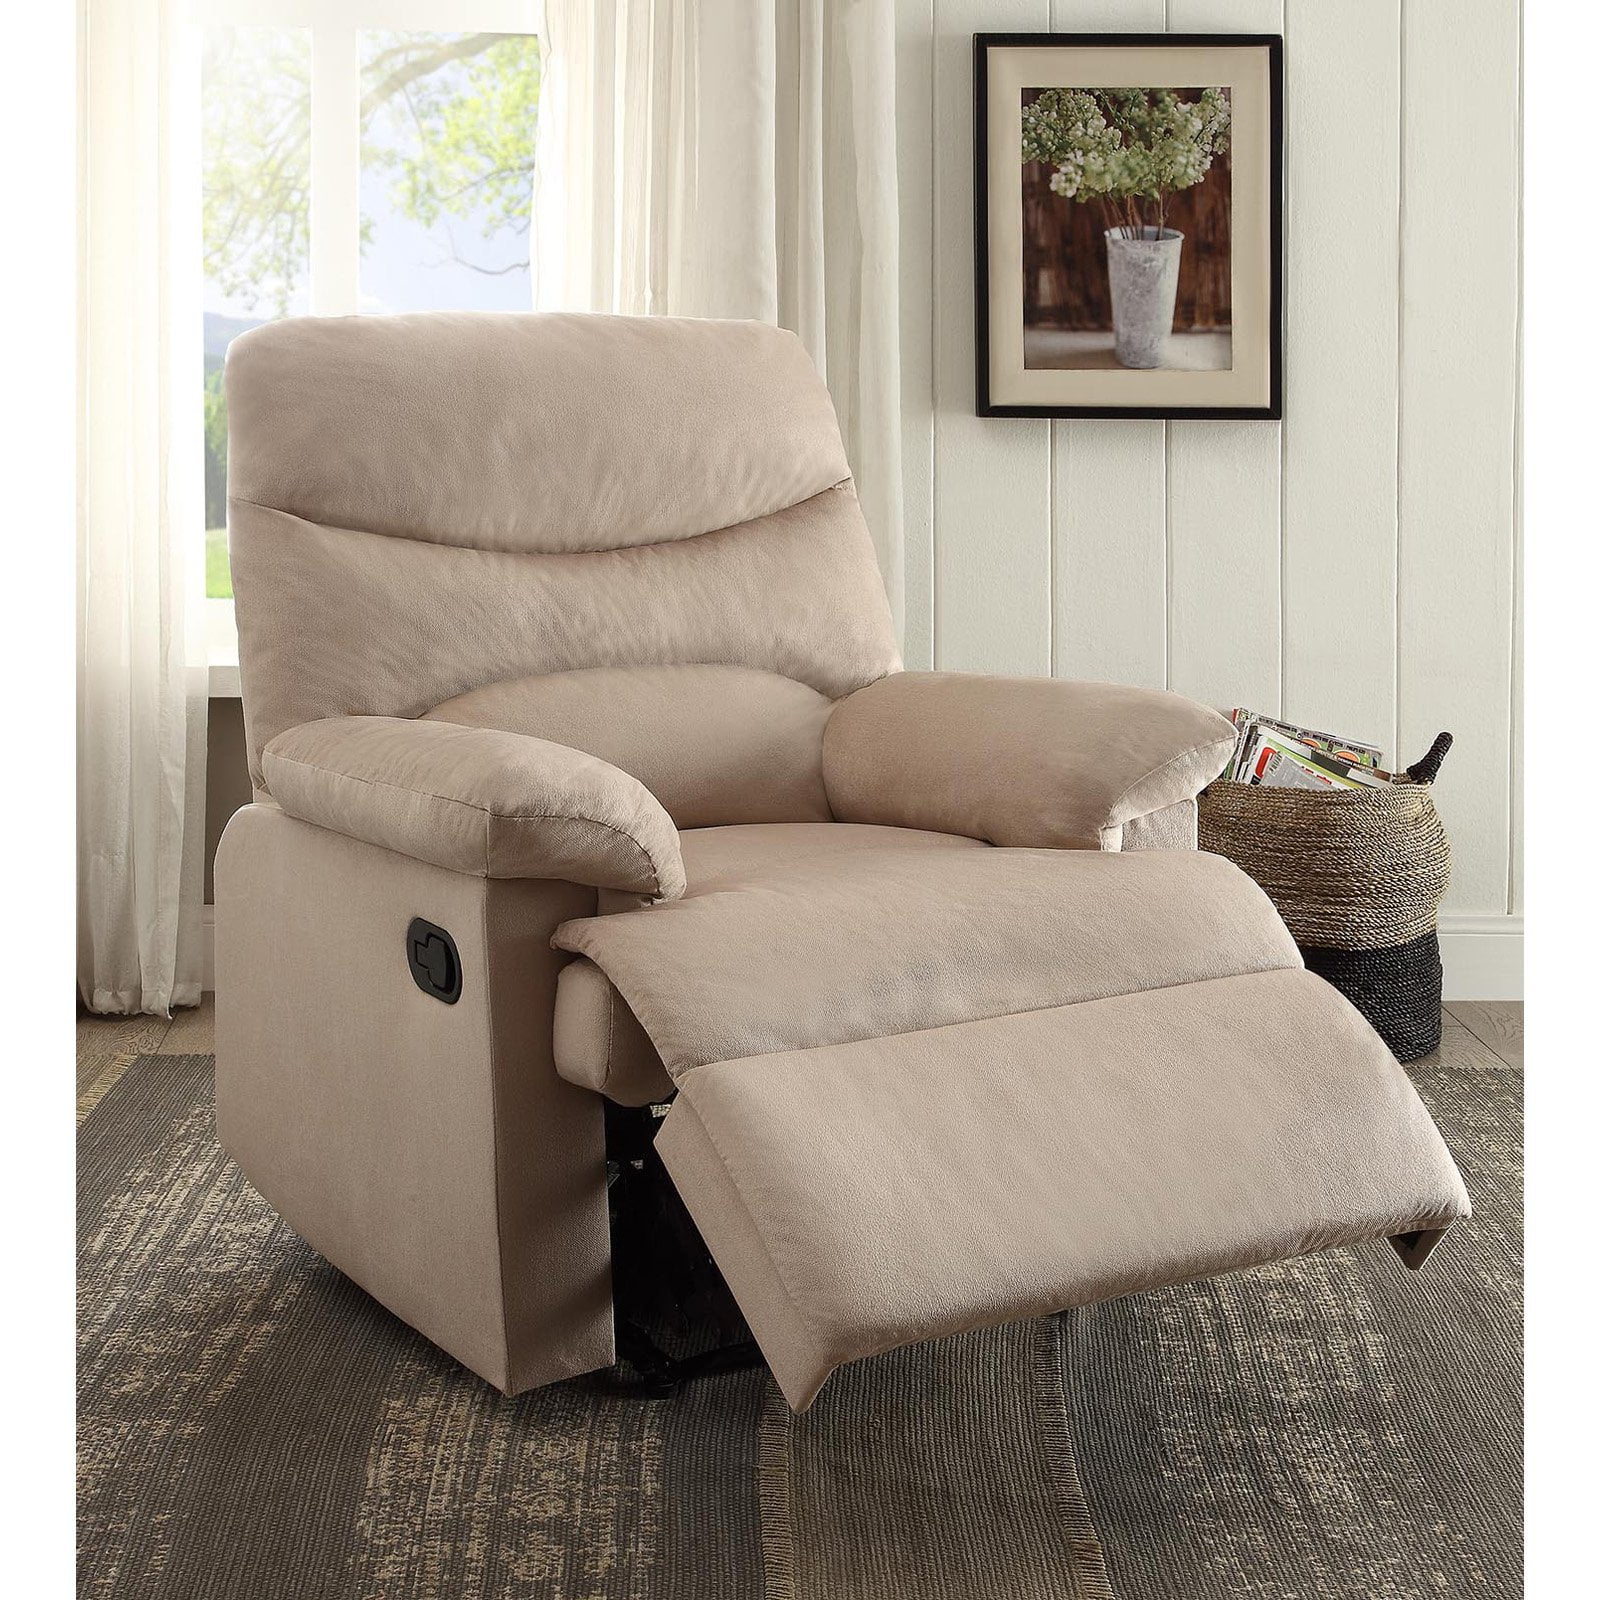 Picture of ACME 00702 Arcadia Recliner - Beige Woven Fabric